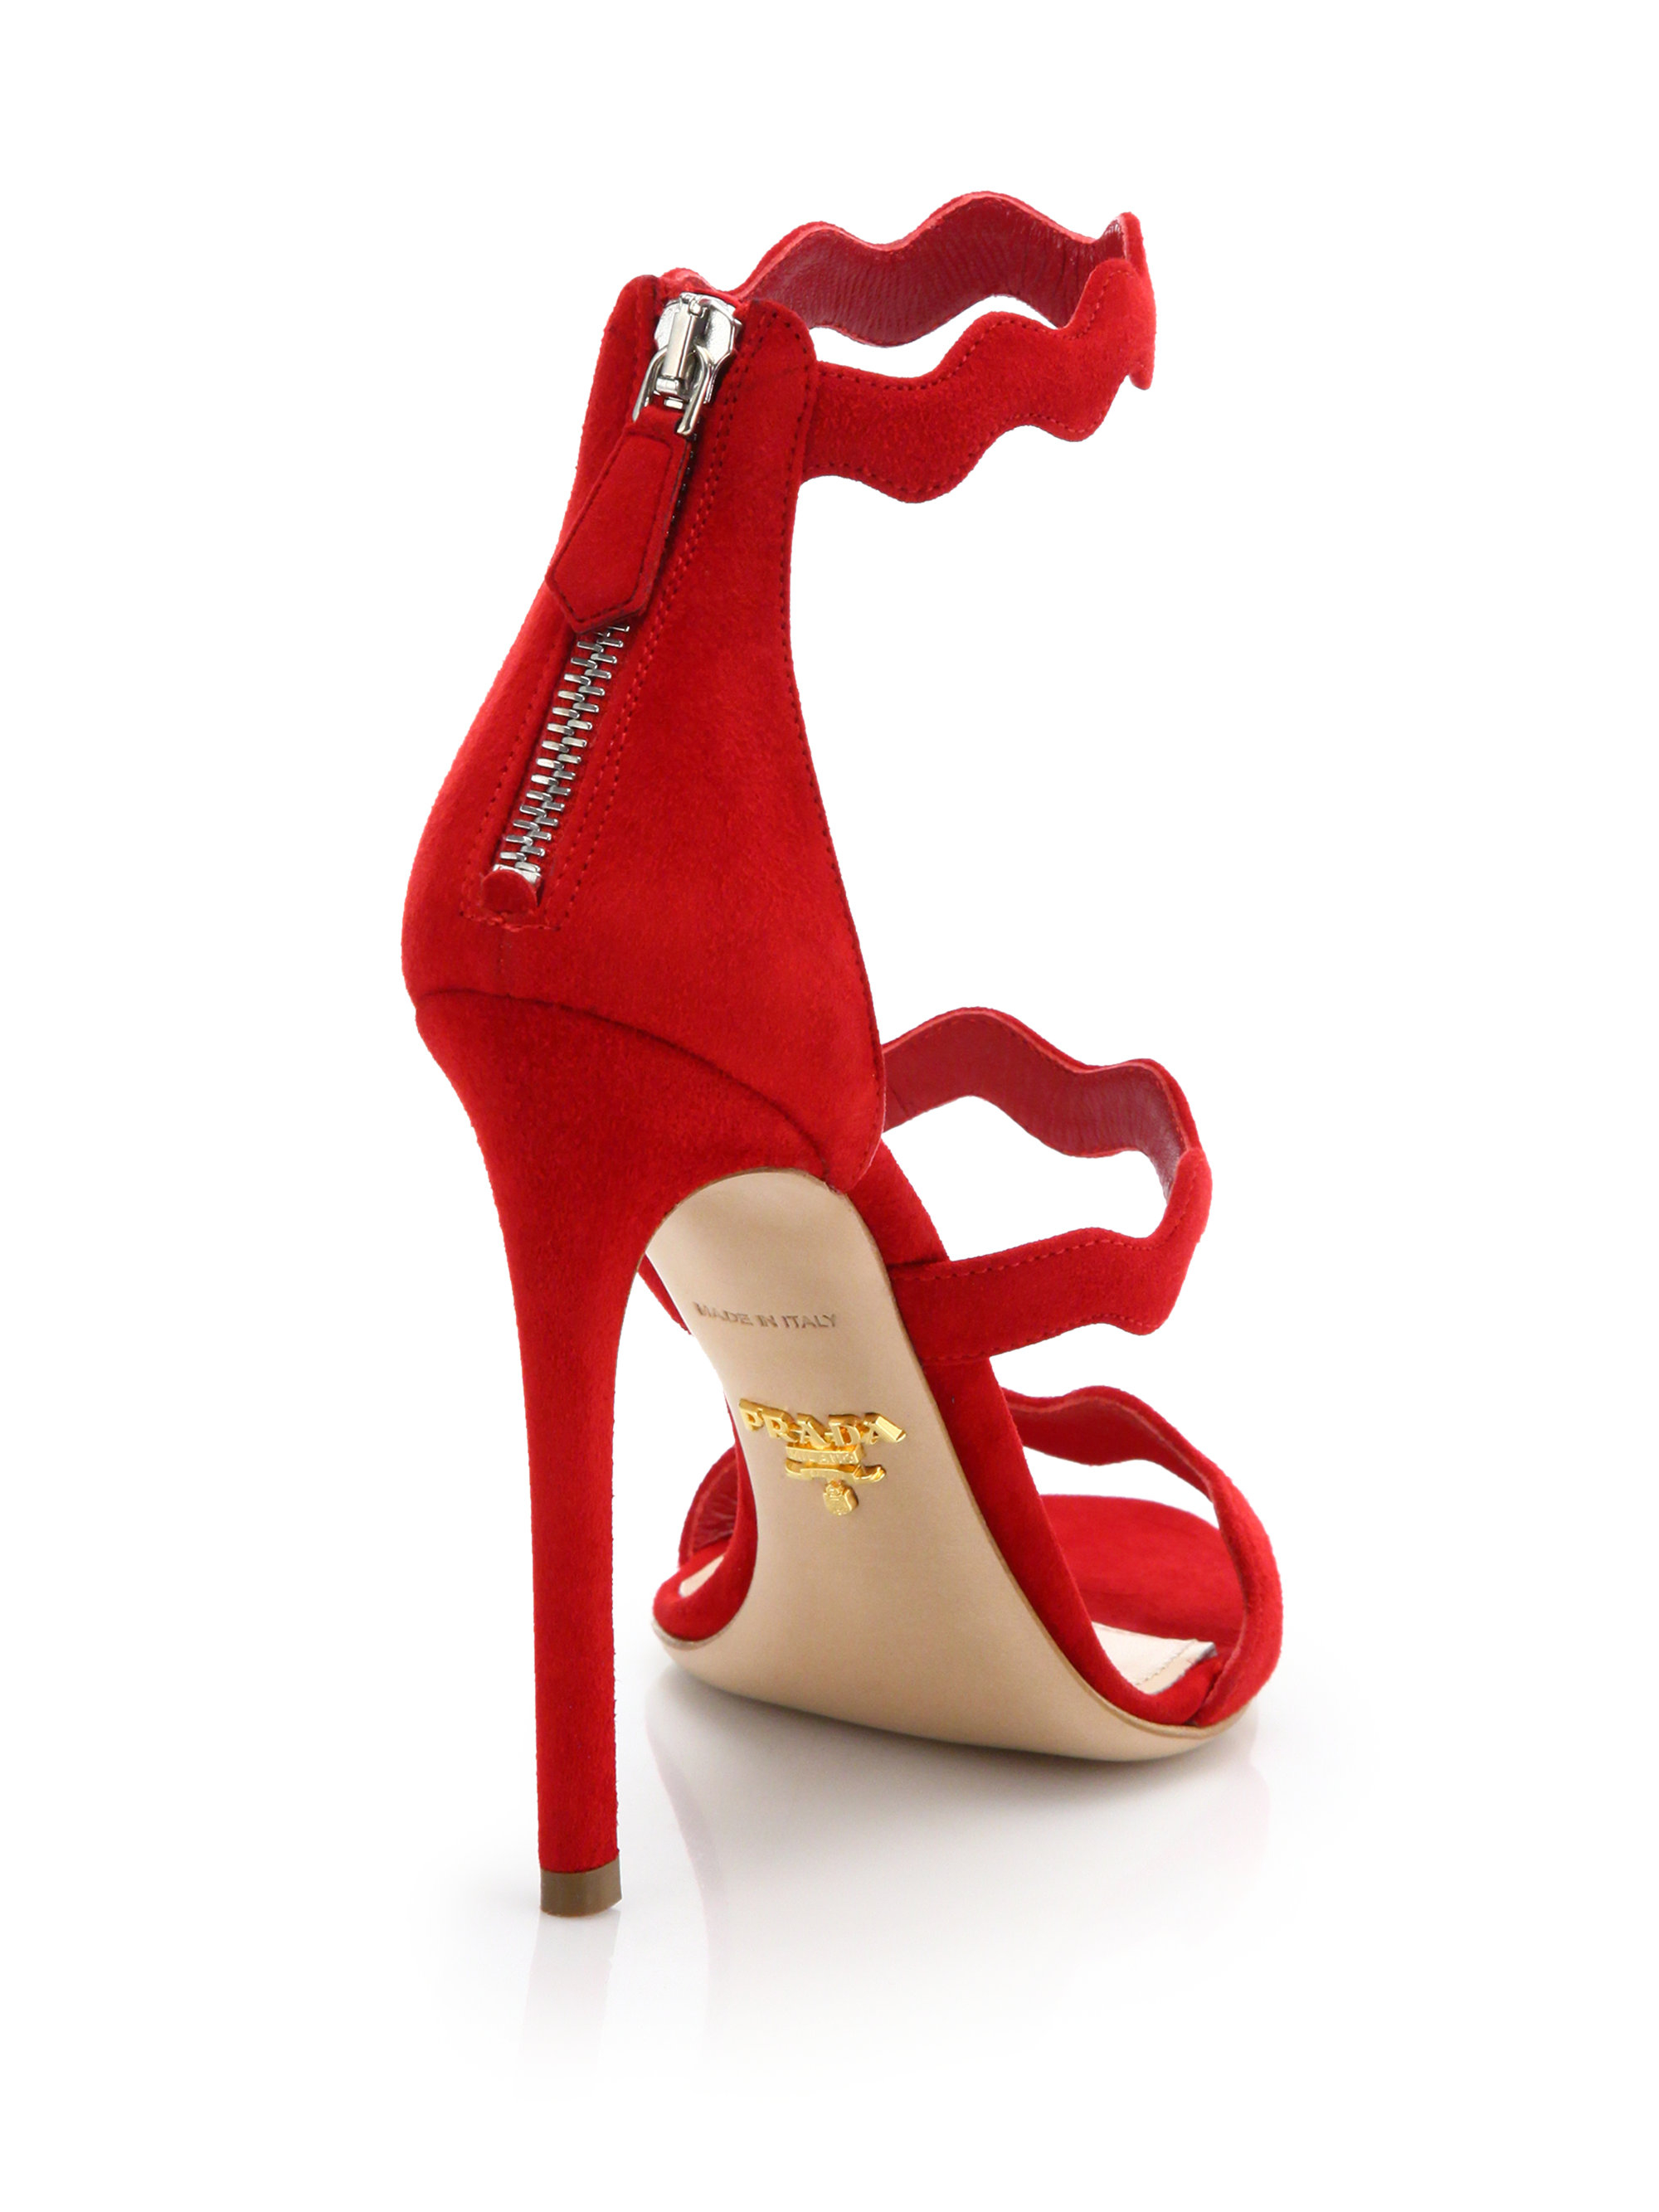 Prada Scalloped Suede Sandals in Red - Lyst